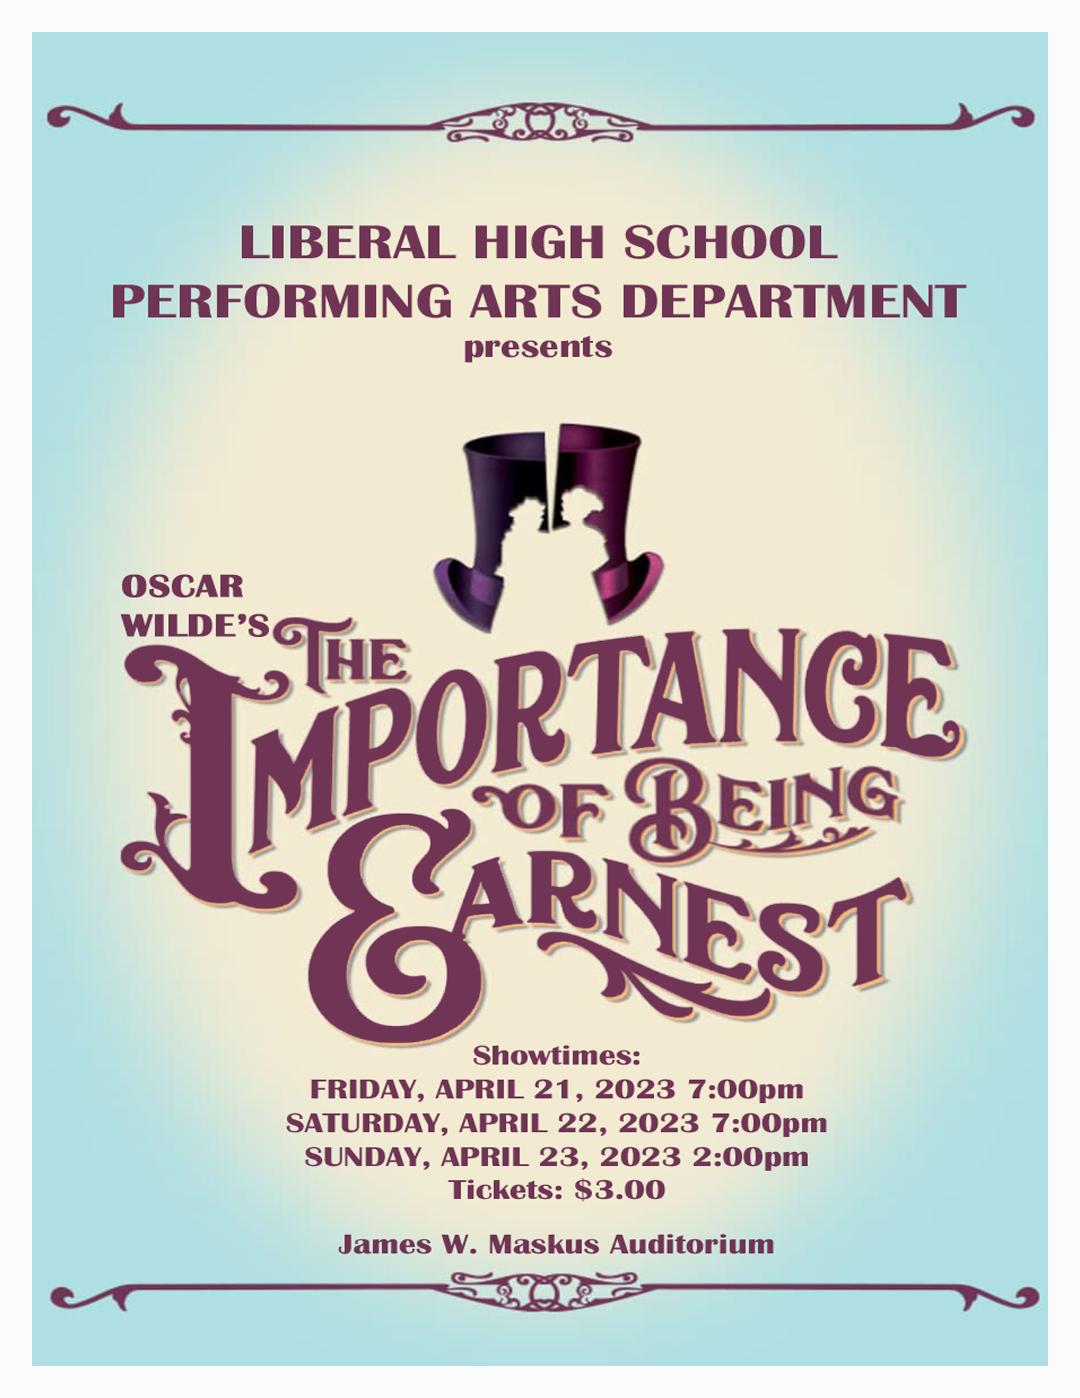 LHS Drama Department to Present its Spring Play